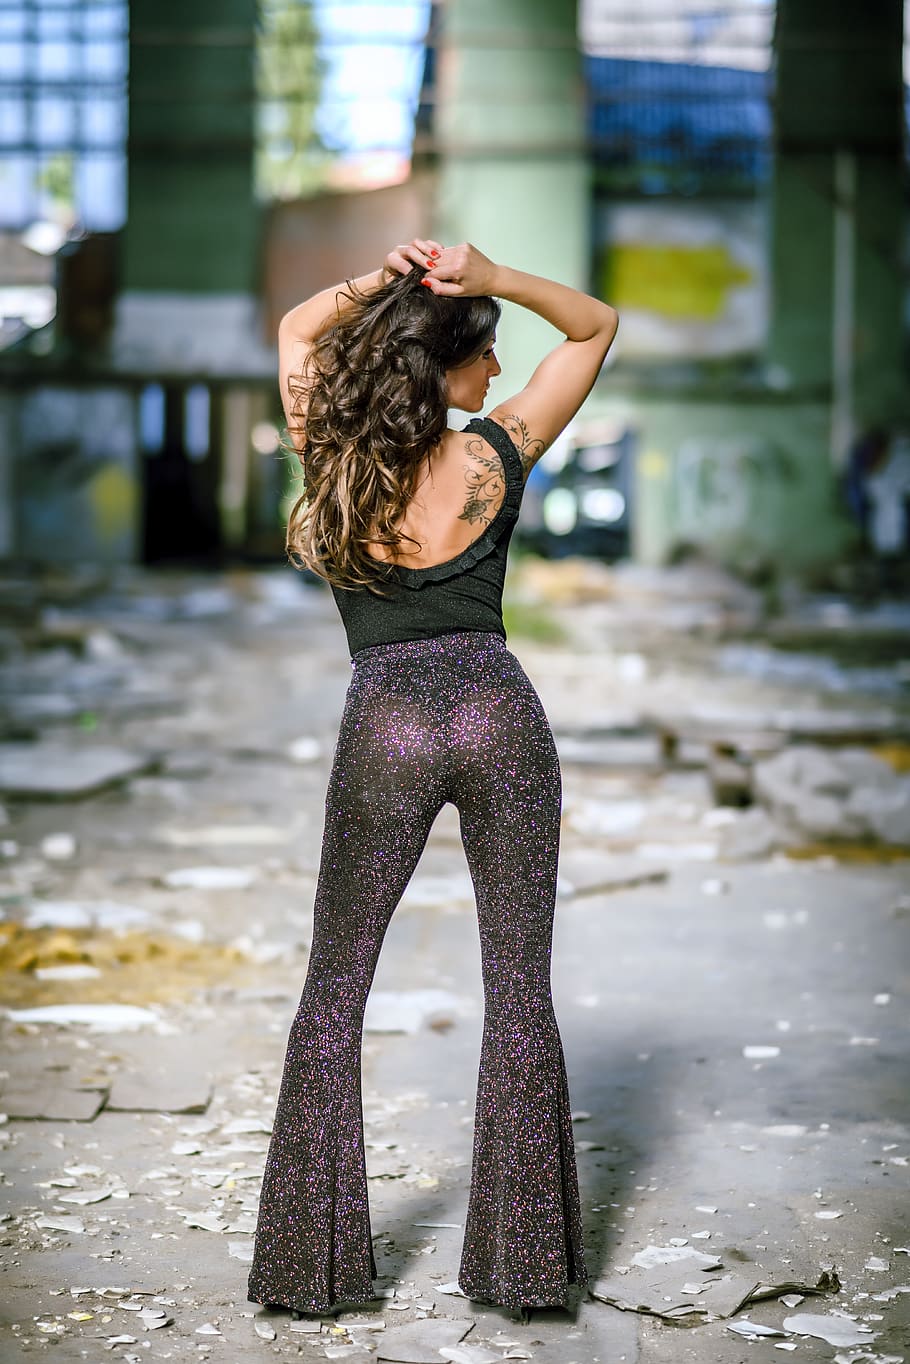 Download Showcasing Edgy Glamour: Elegant Black Women in Back-to-back Pose  Wallpaper | Wallpapers.com